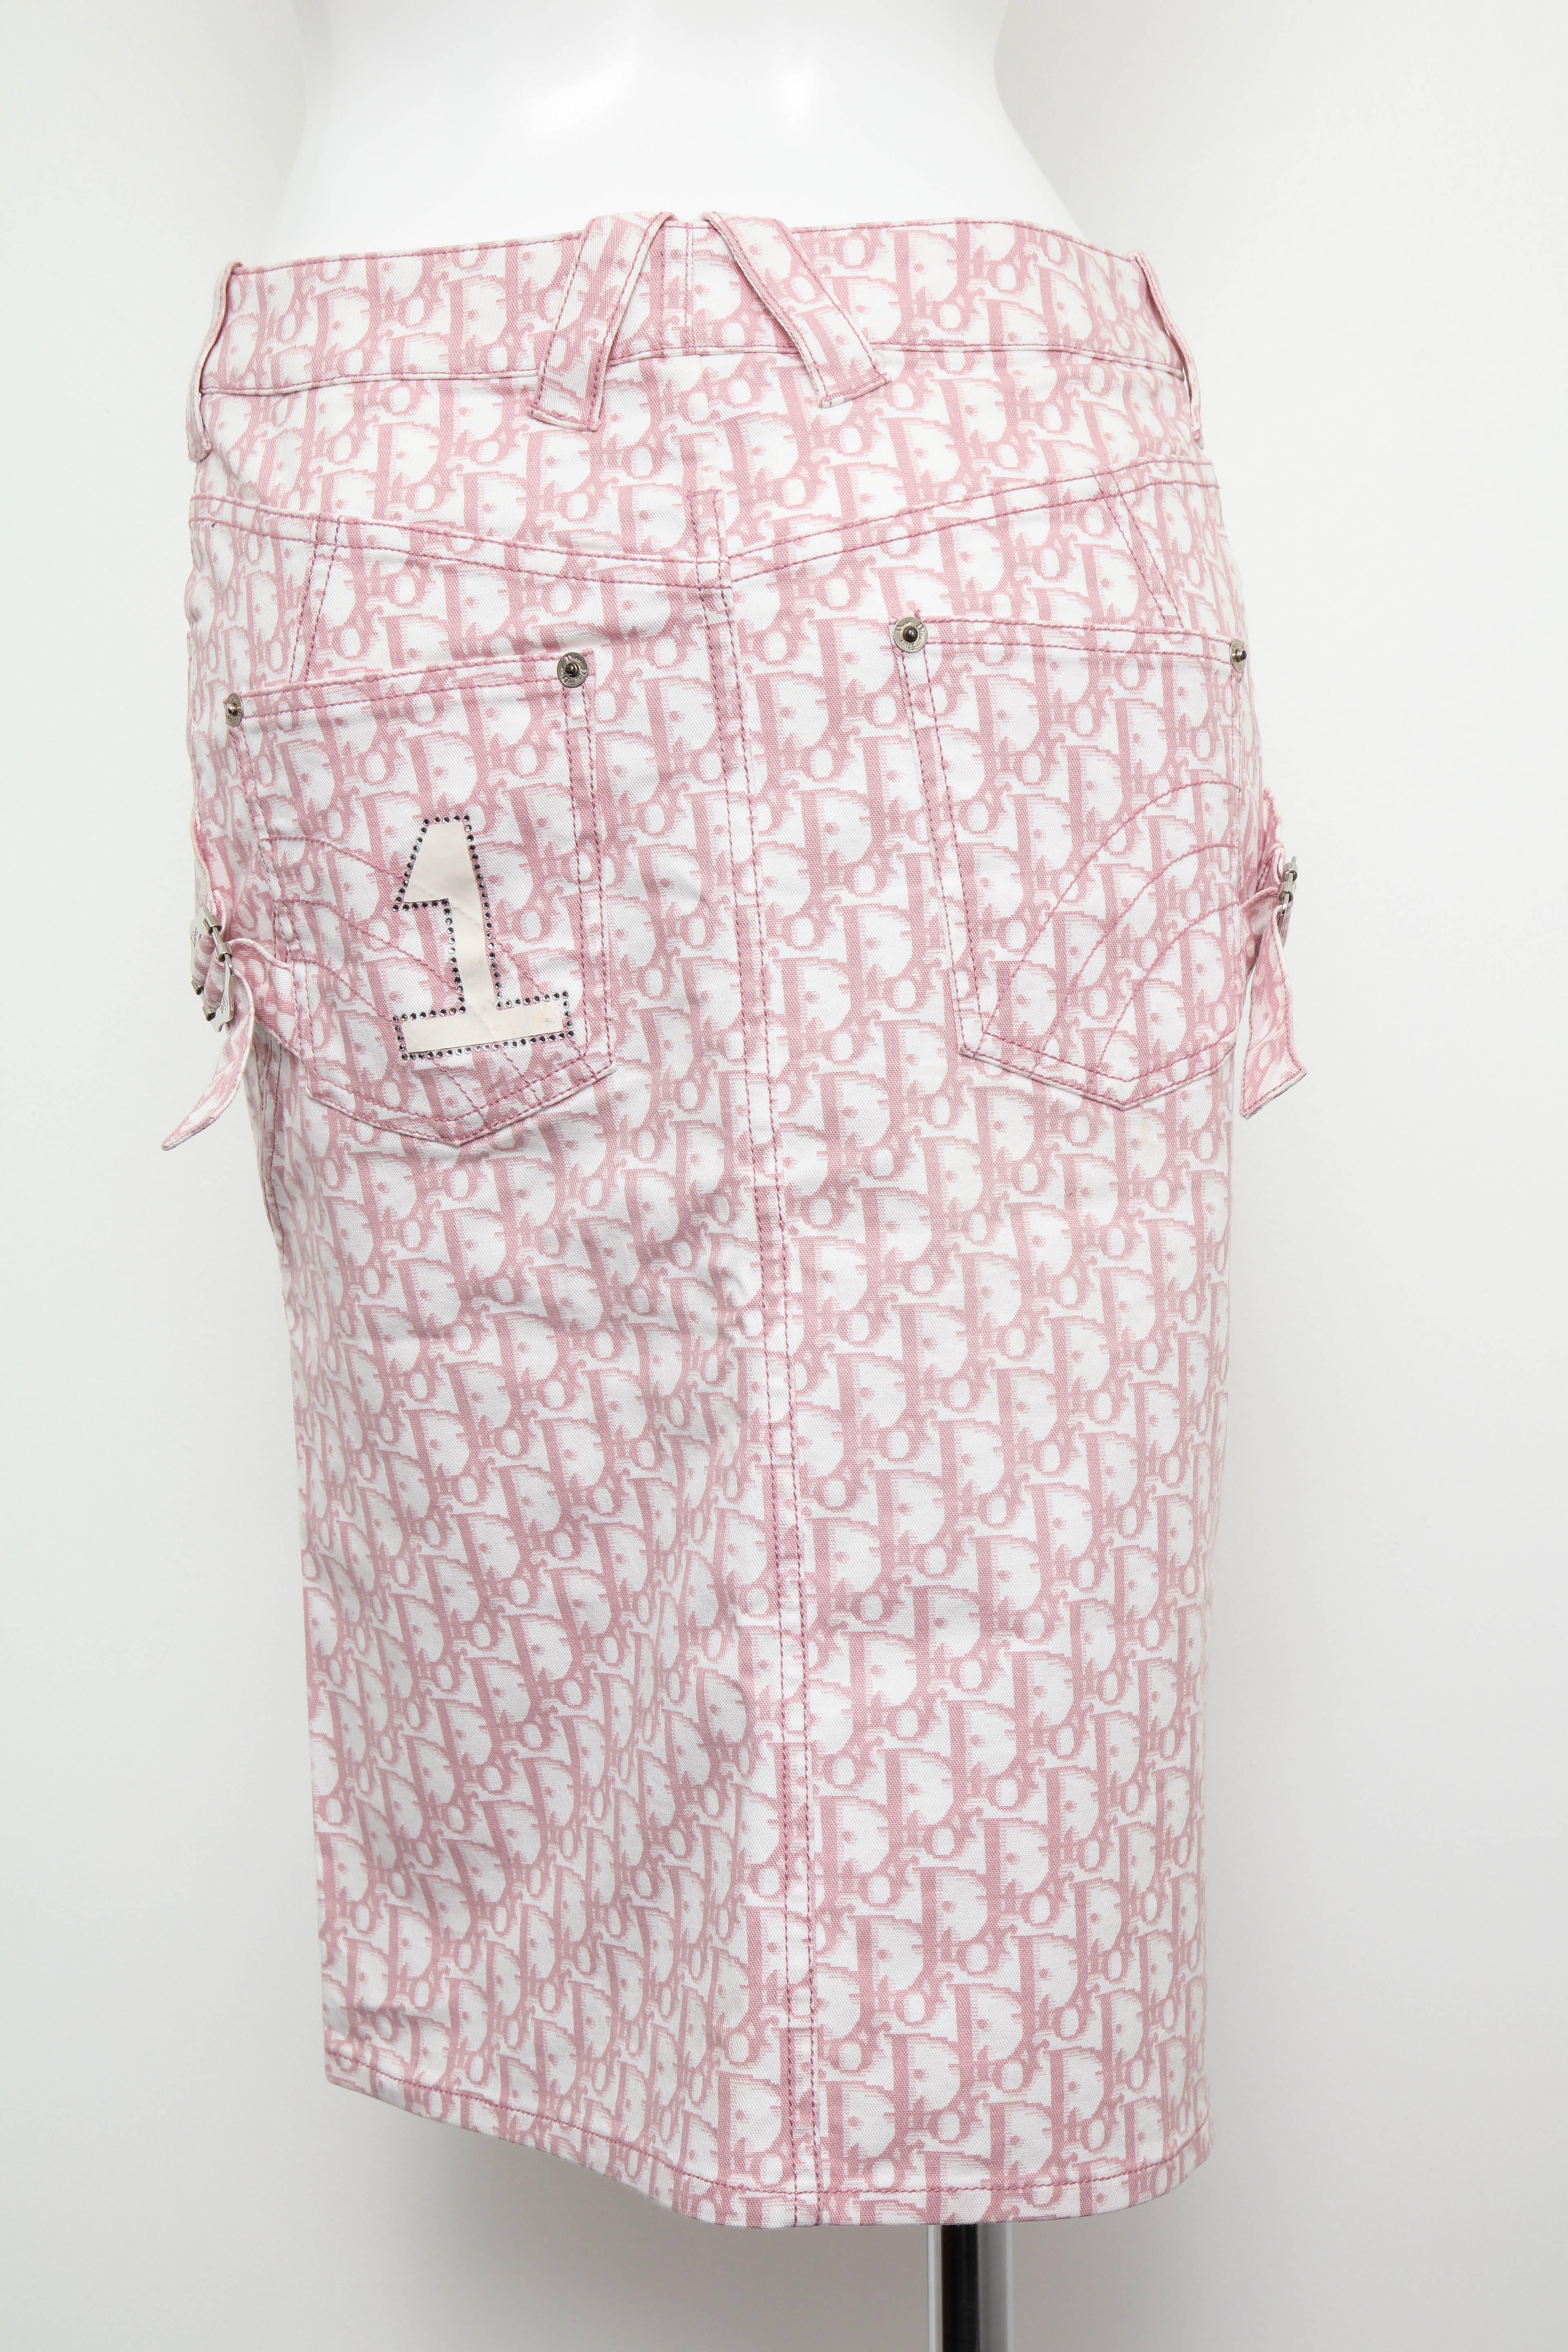 Women's John Galliano for Christian Dior Pink Trotter Logo Pencil Skirt For Sale